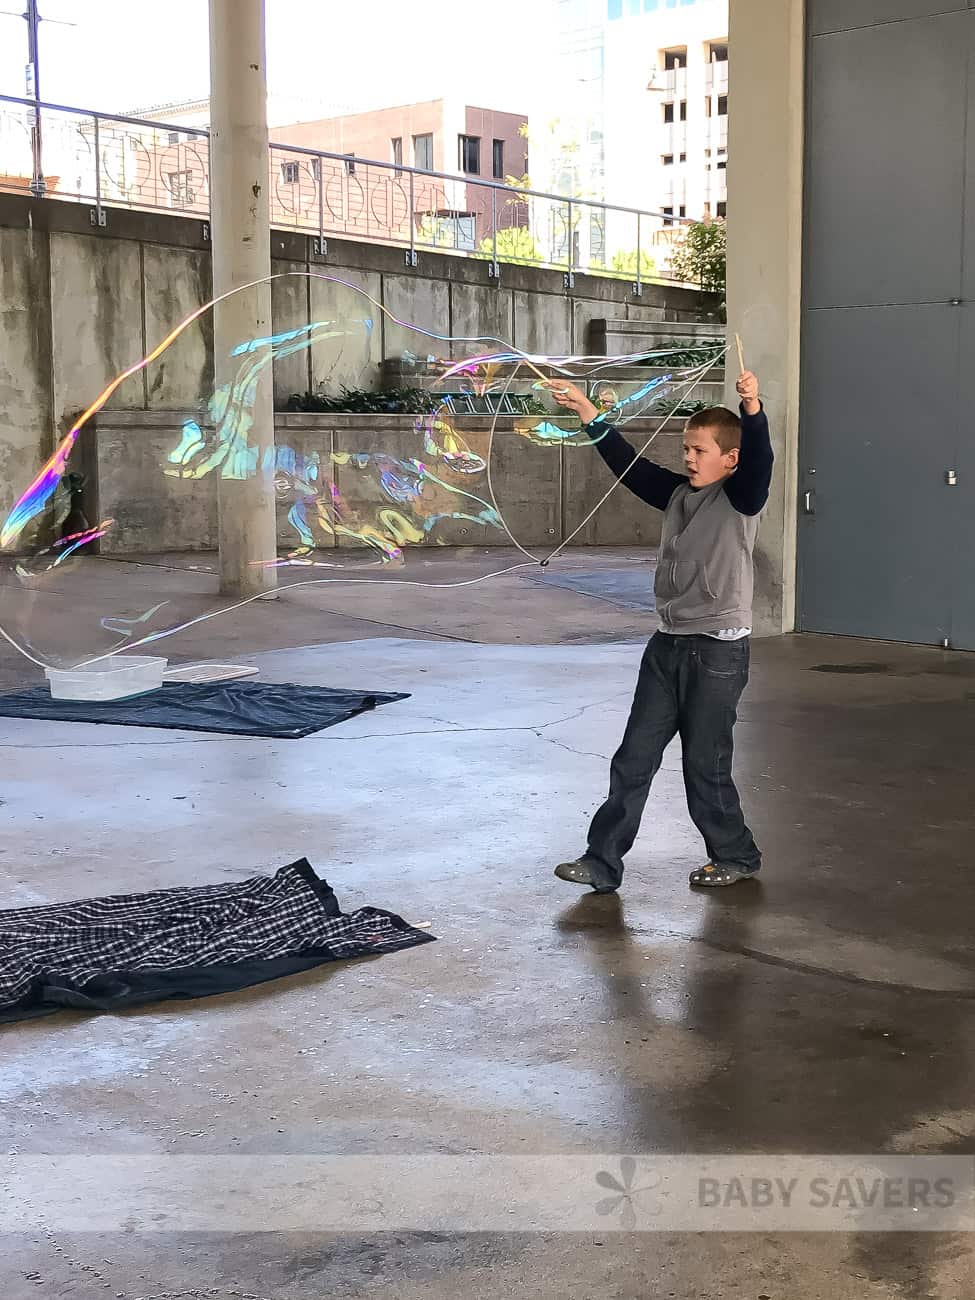 giant bubbles being made by a kid